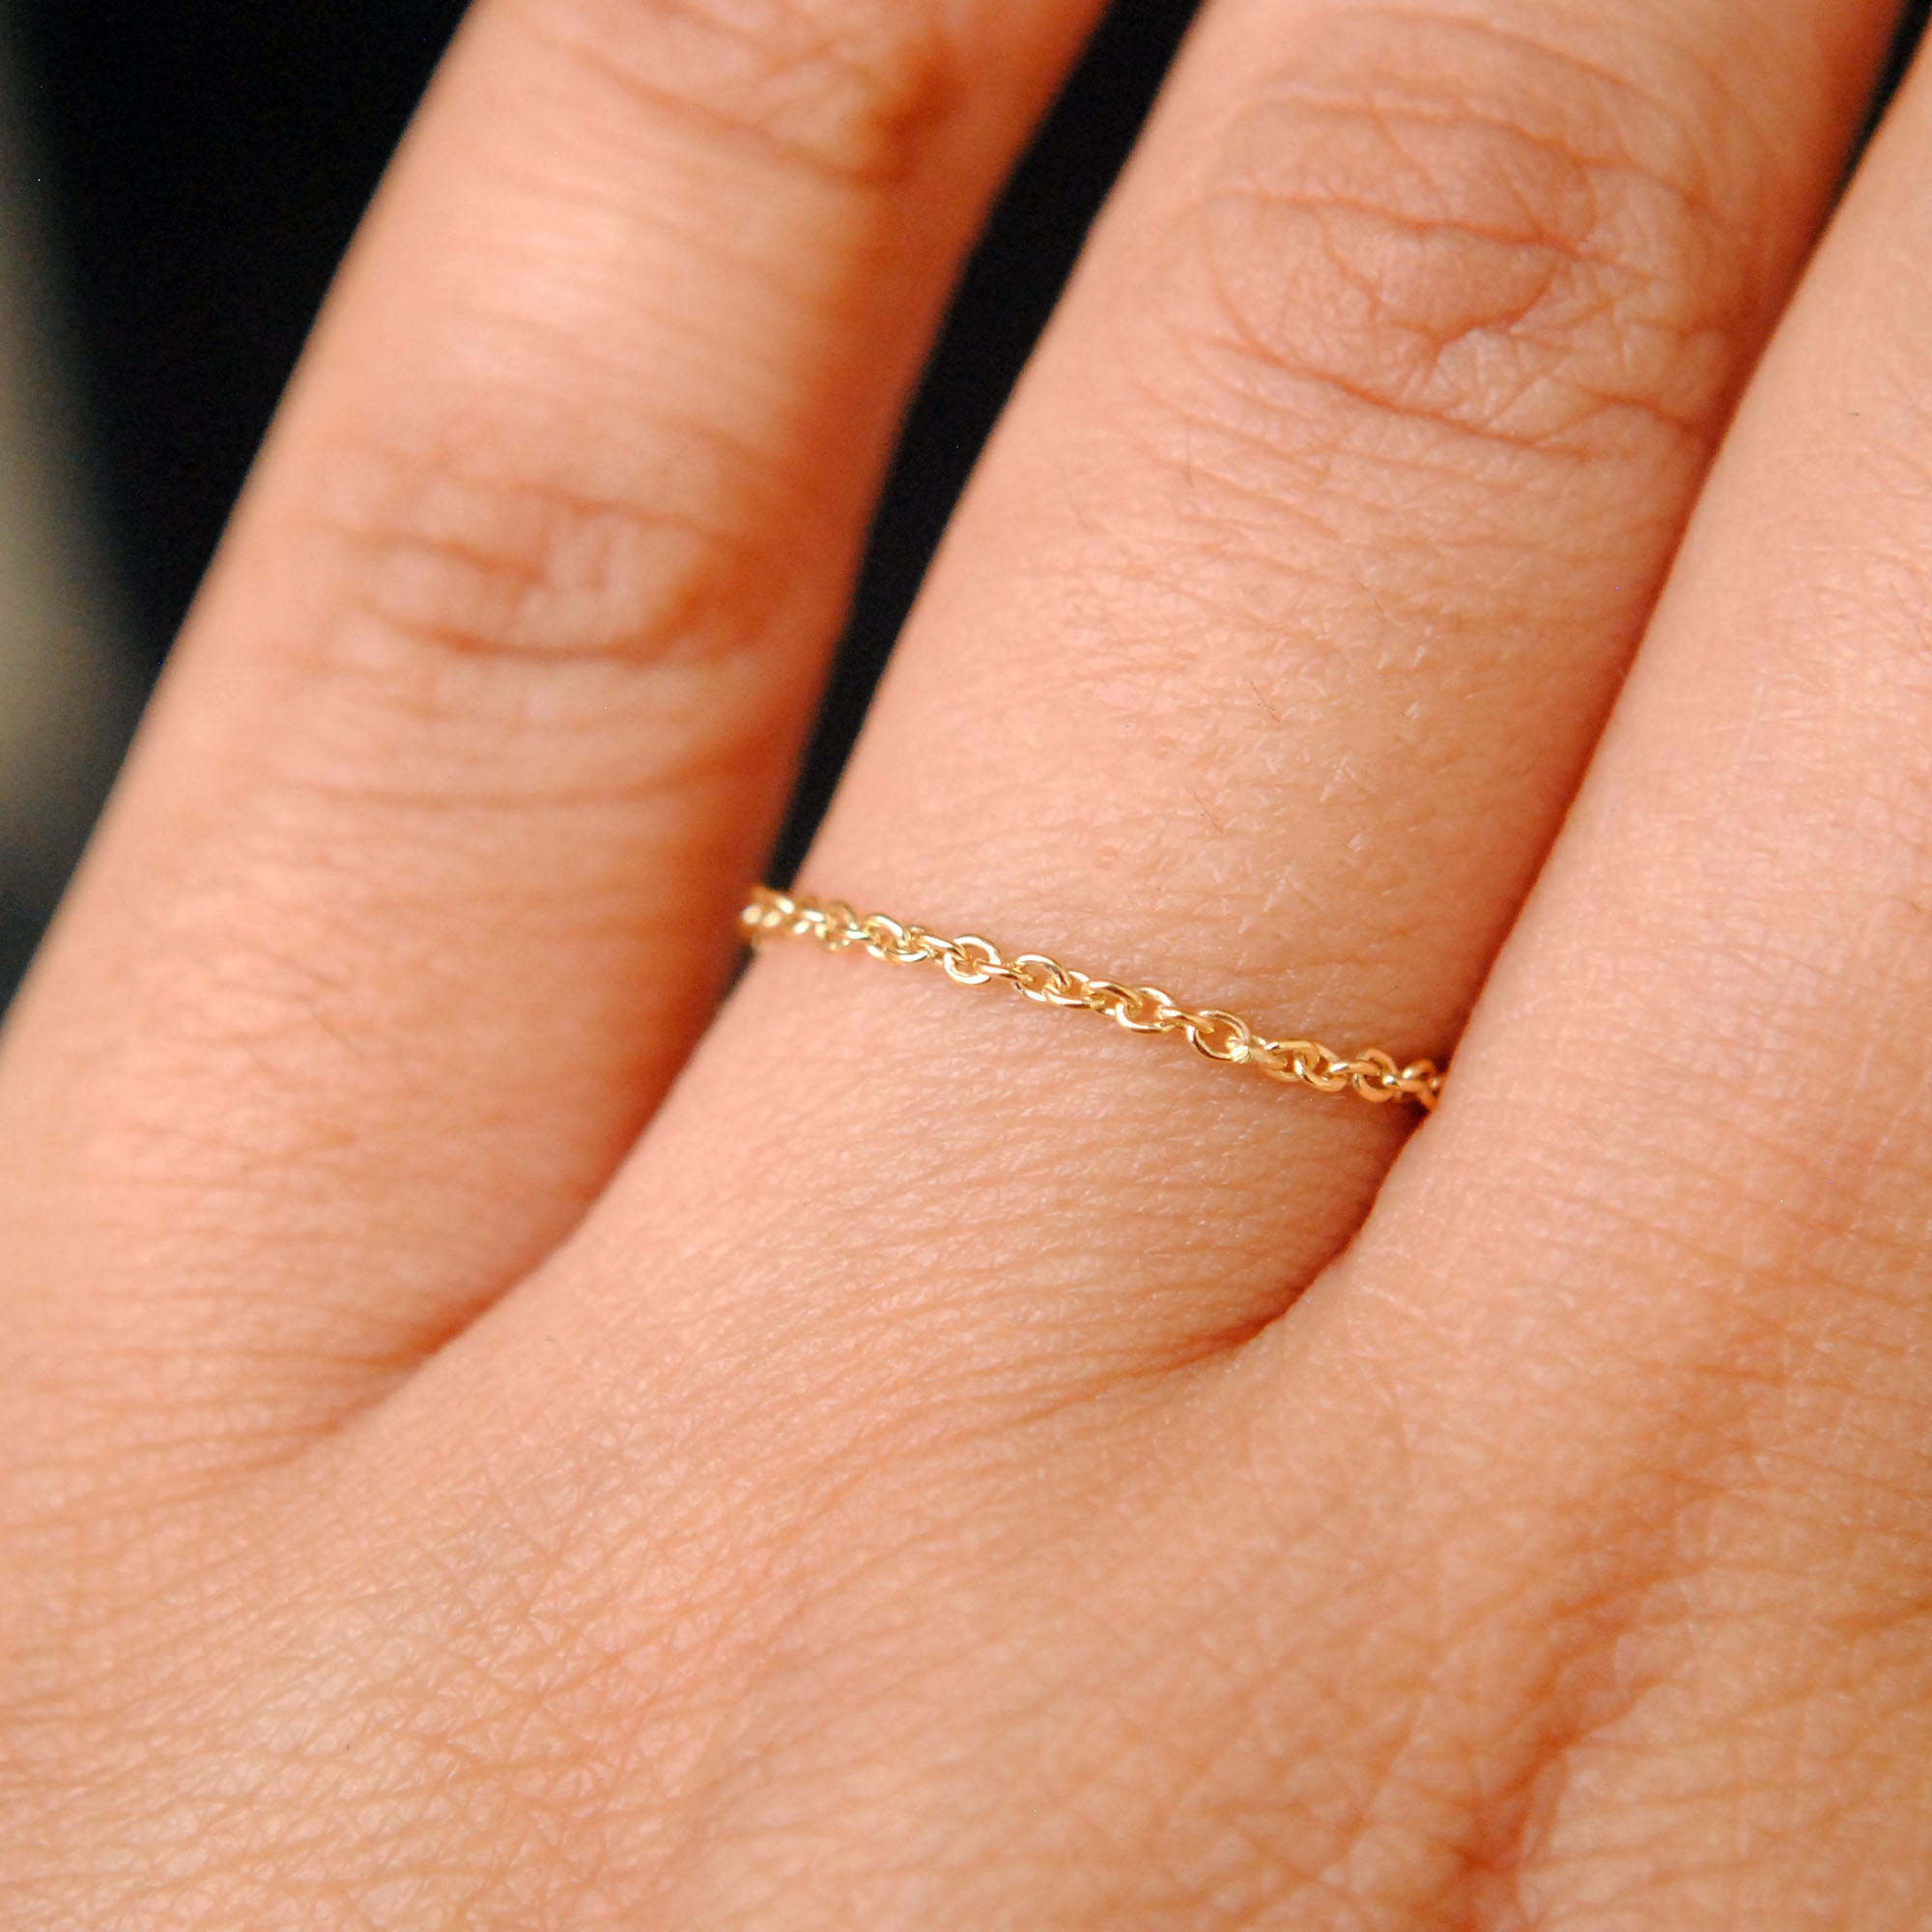 Buy Gold Chain Ring, Link Chain Ring, Statement Ring, Curb Chain Ring,  Cuban Link Ring, Stacking Ring, Gold Link, Sterling Silver, Gift for Her  Online in India - Etsy